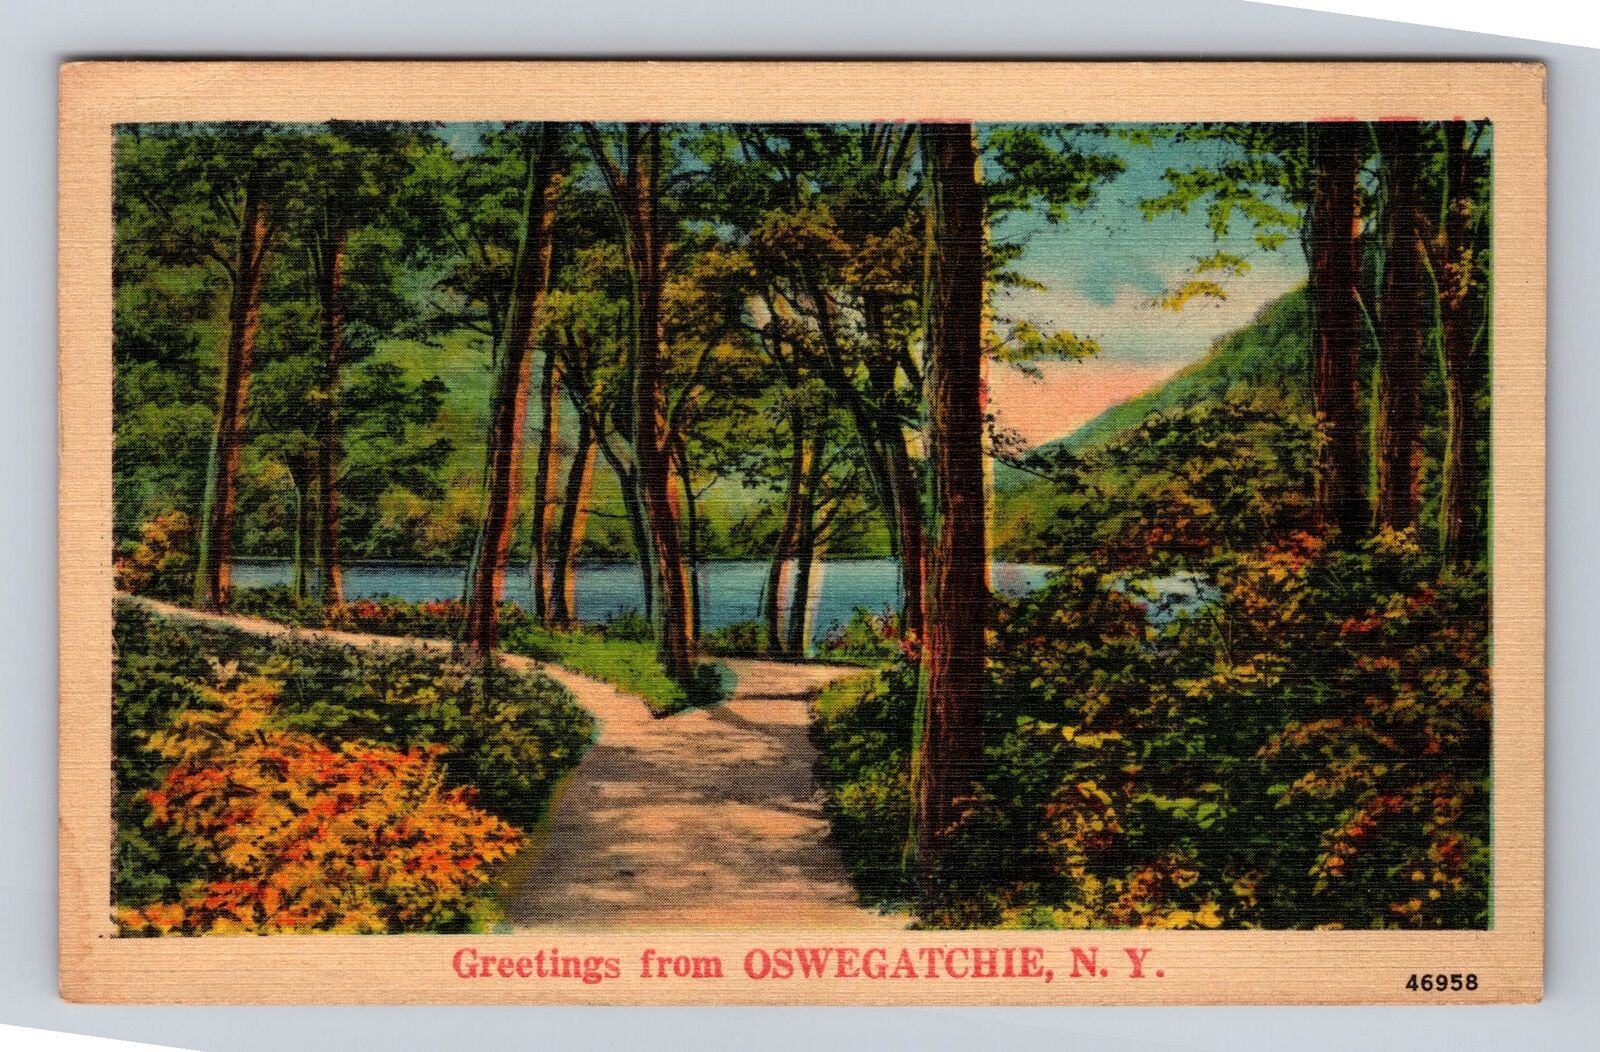 Oswegatchie NY-New York, General Greetings, Scenic Country View Vintage Postcard